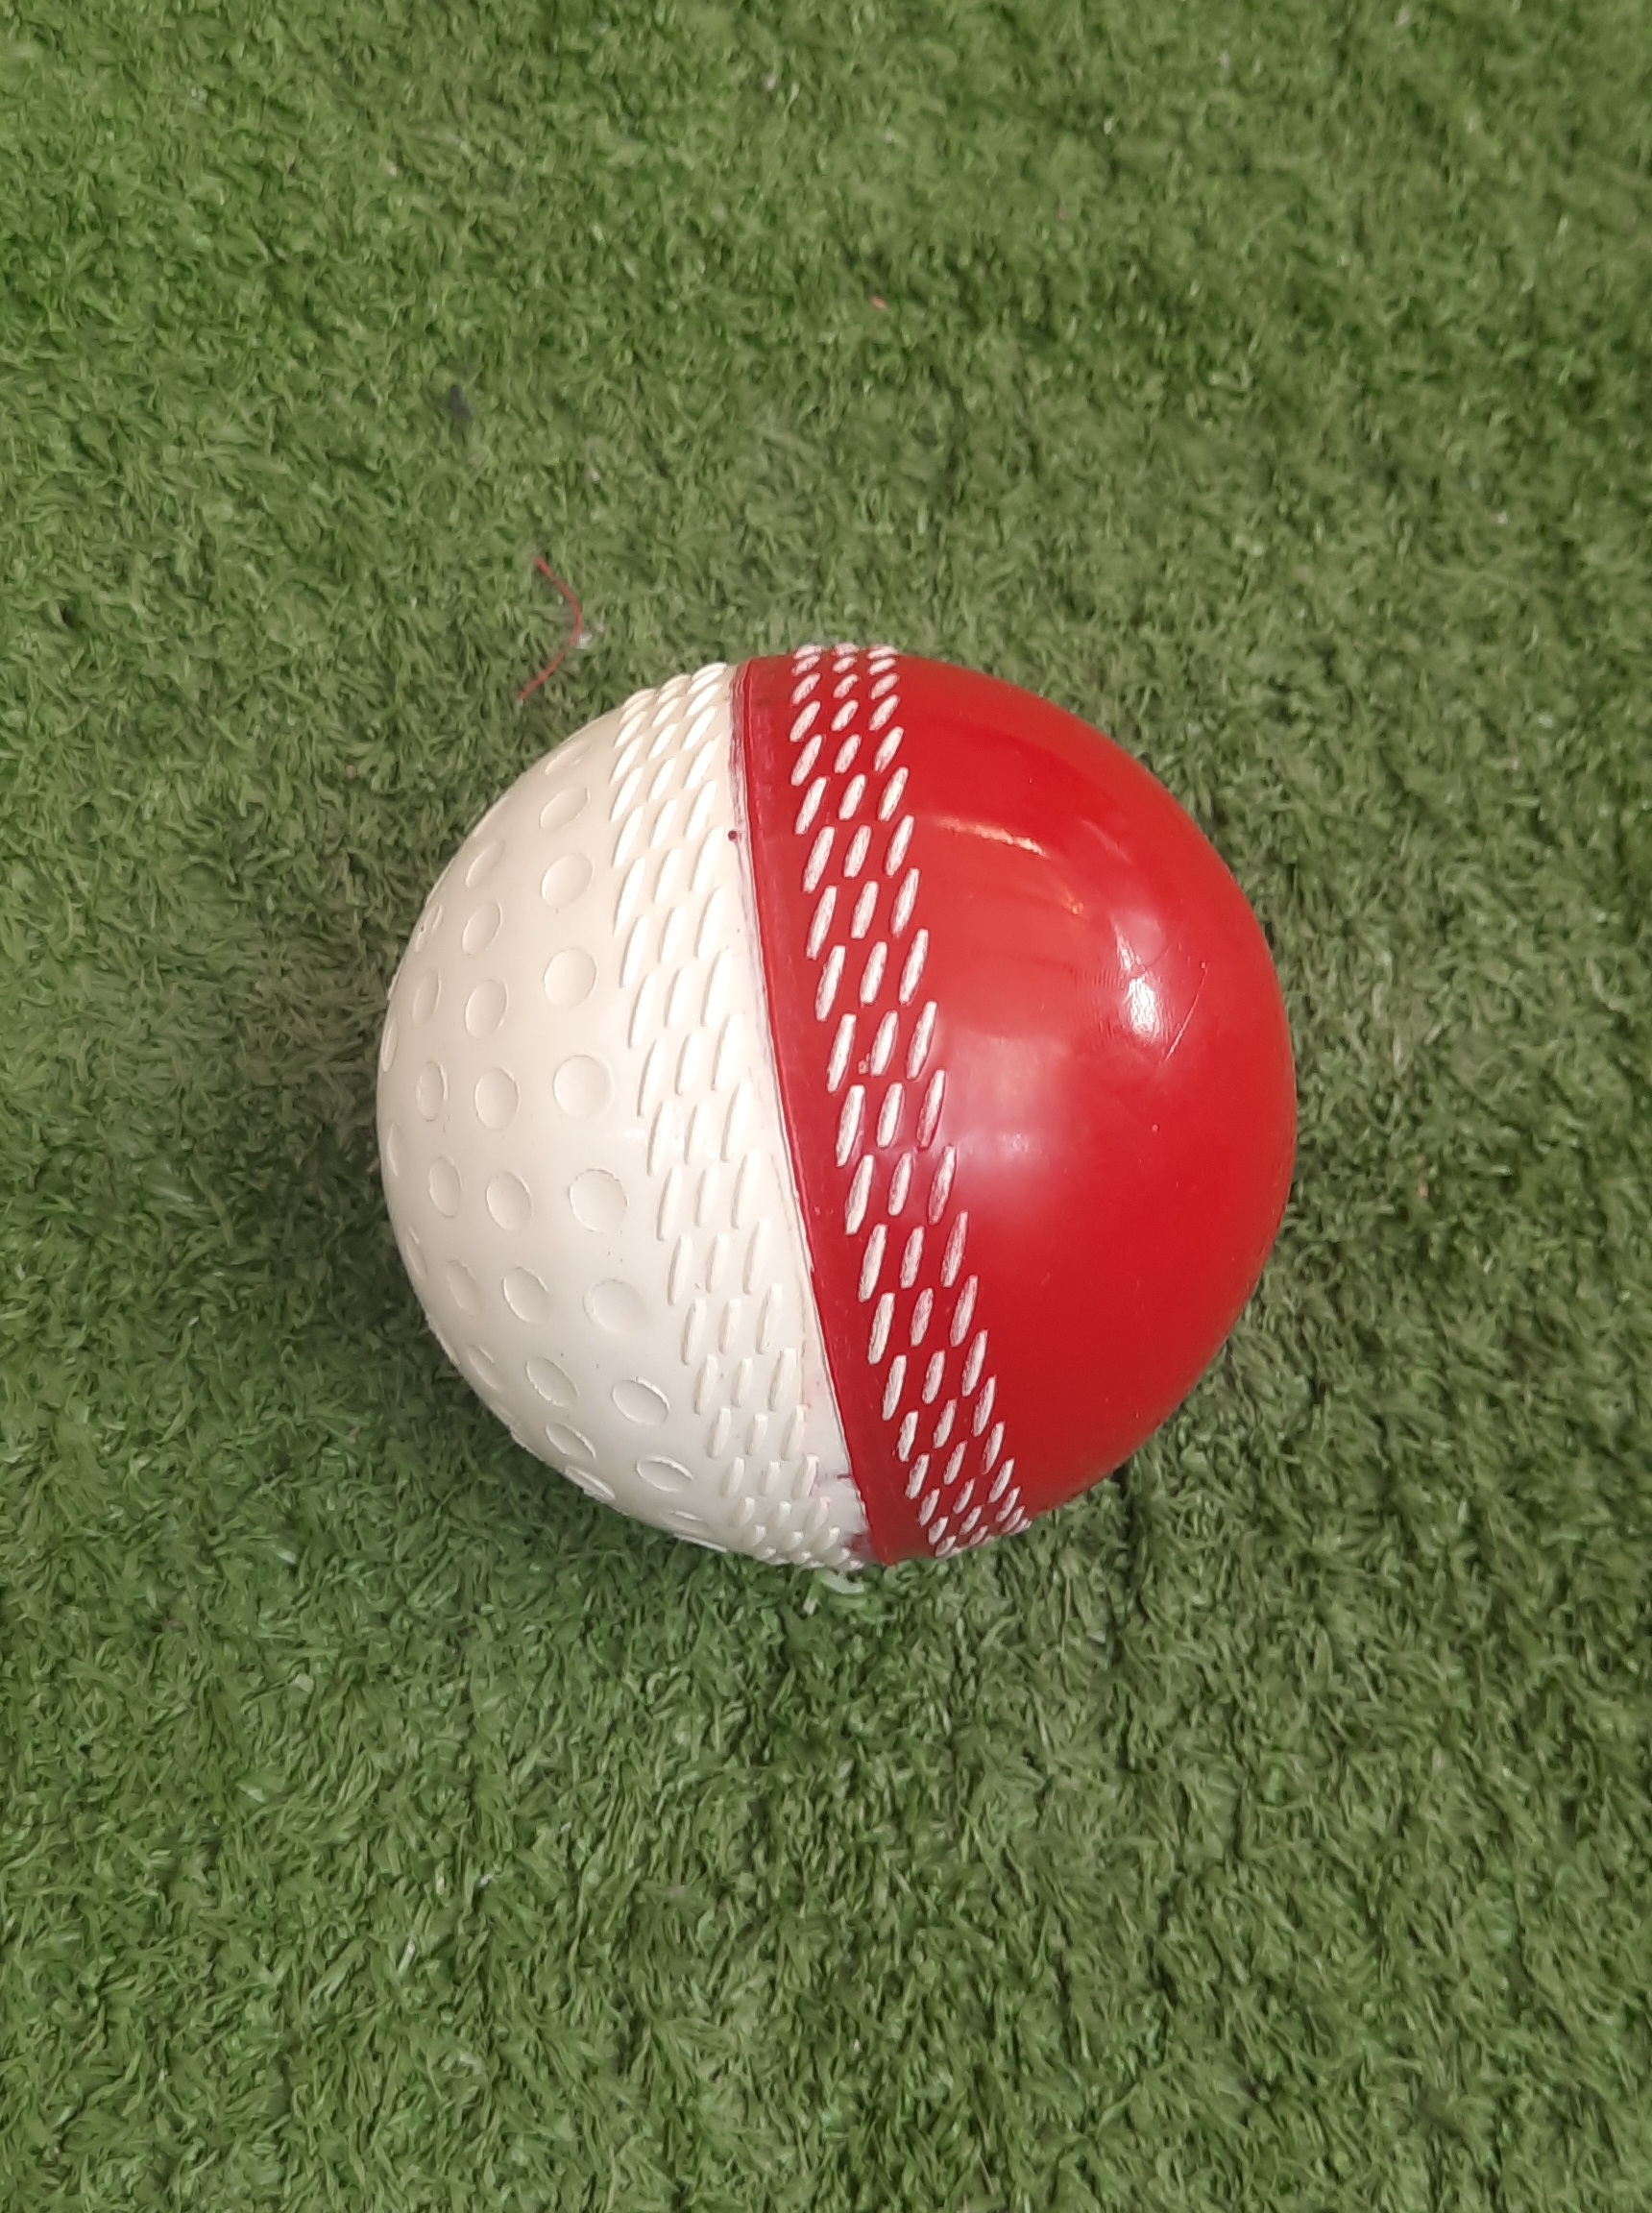 Which Cricket Ball Swings More? Red or White? – Western Sports Centre